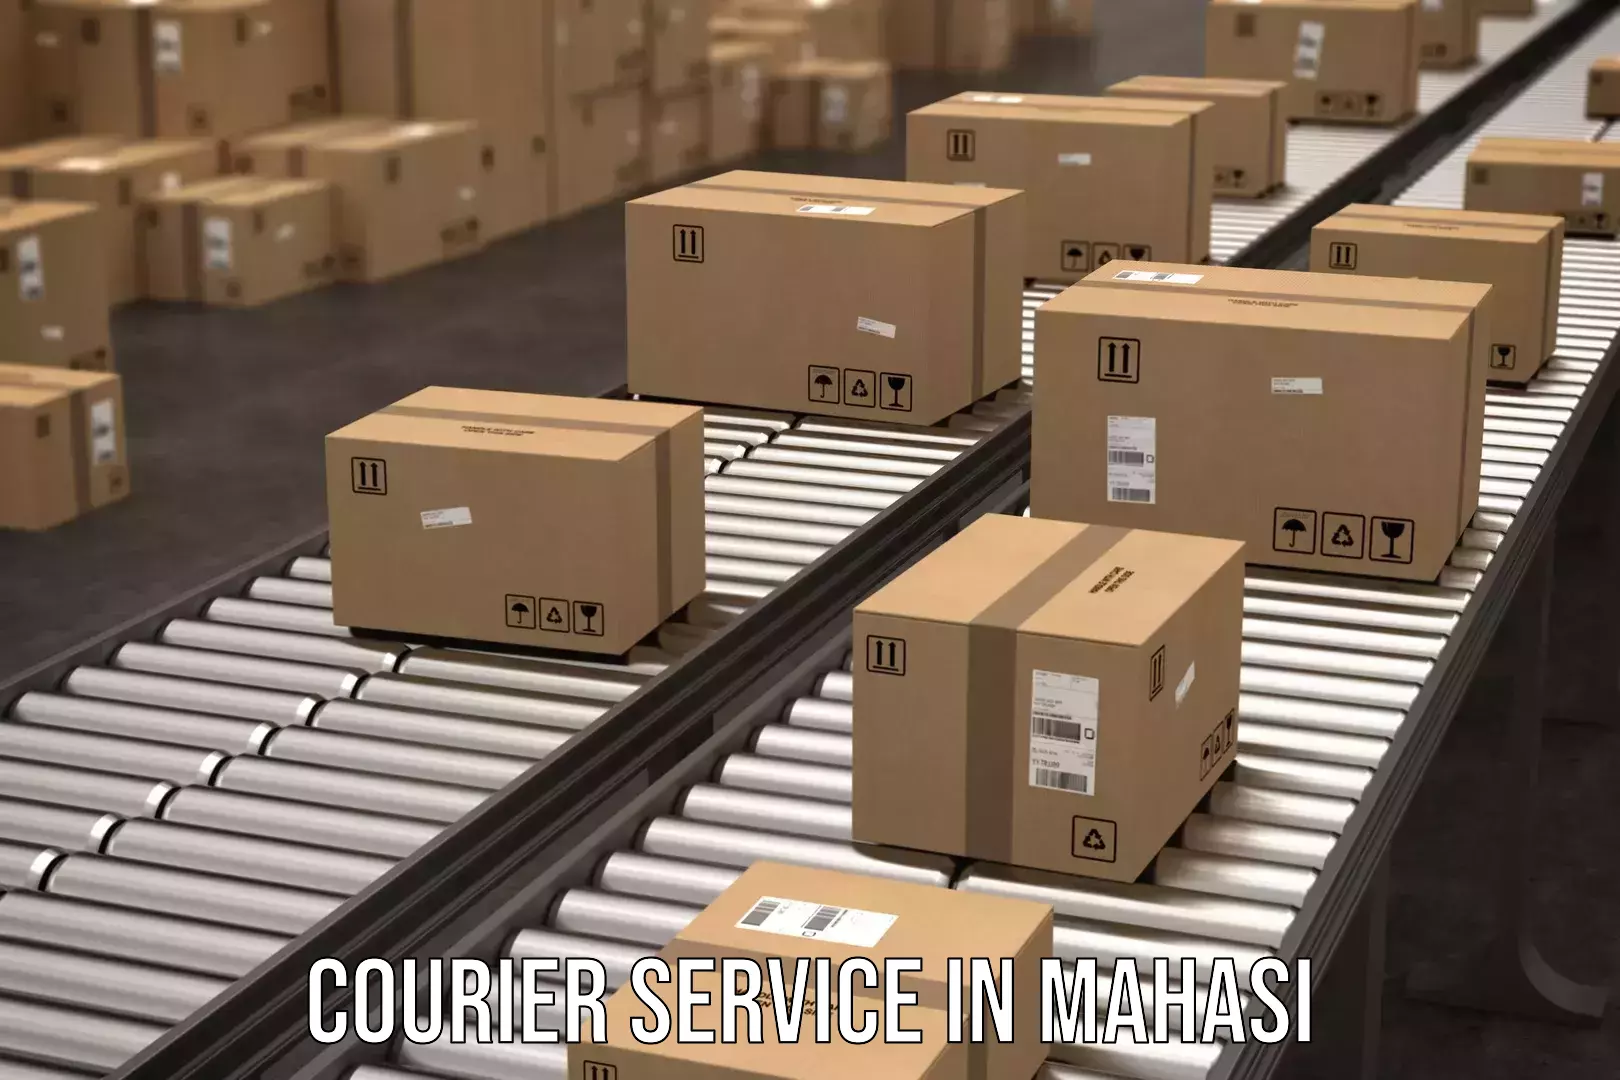 24-hour delivery options in Mahasi